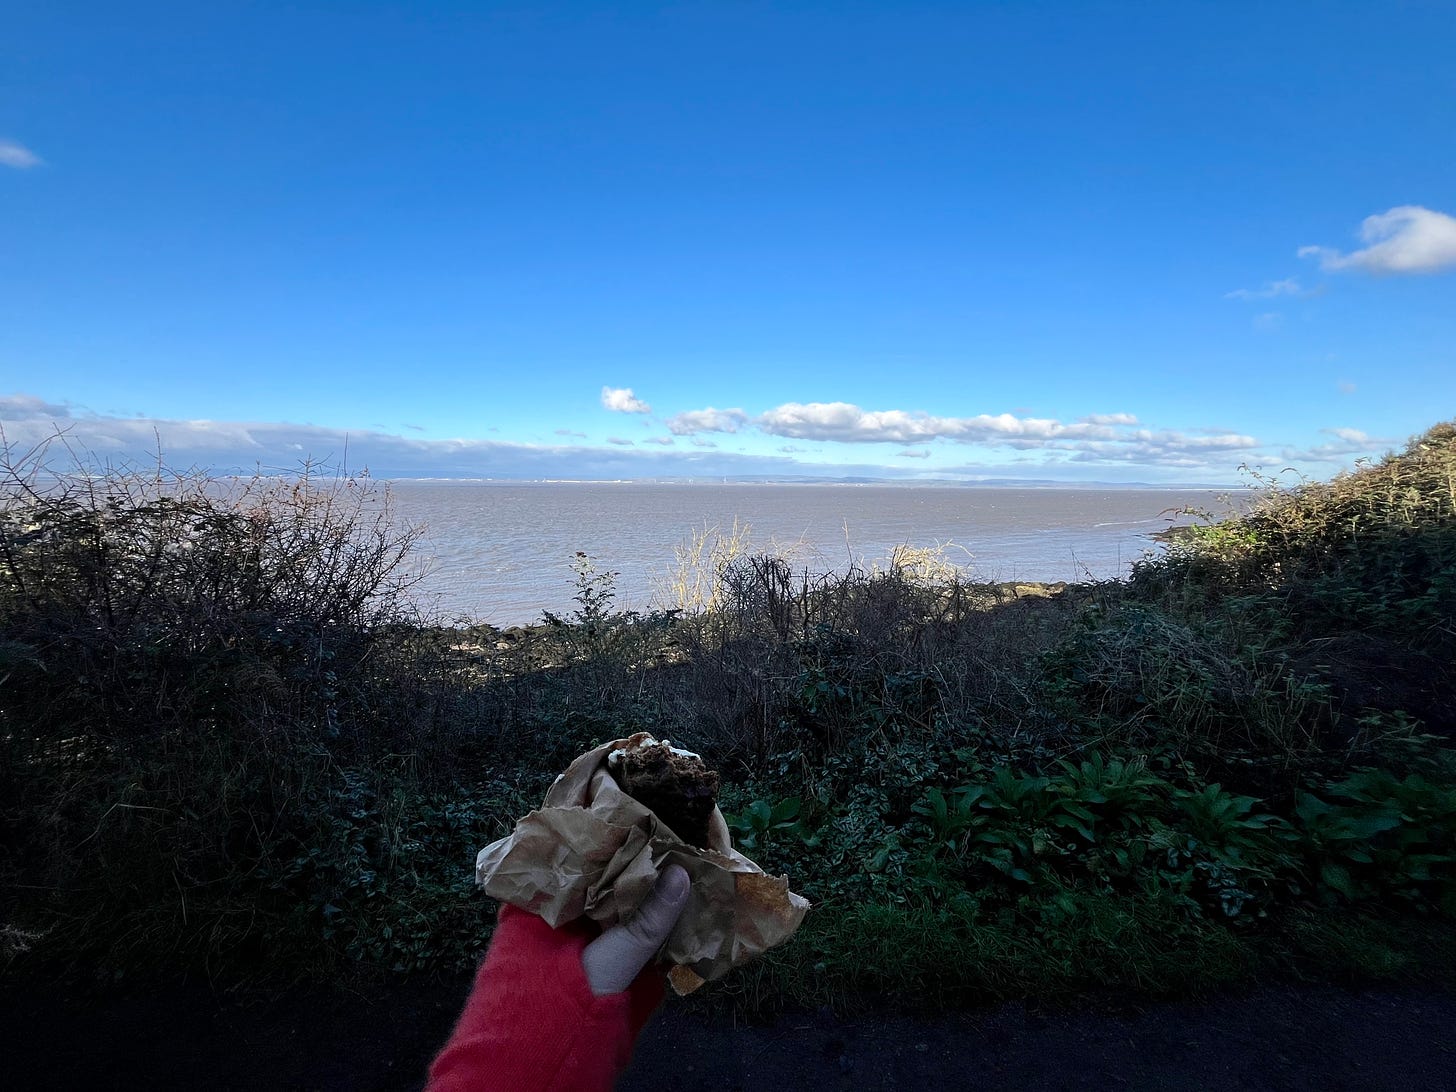 Landscape photo showing my hand, in an orange mitt, holding cake in a paper bag, in front of a sweeping view of the Bristol channel